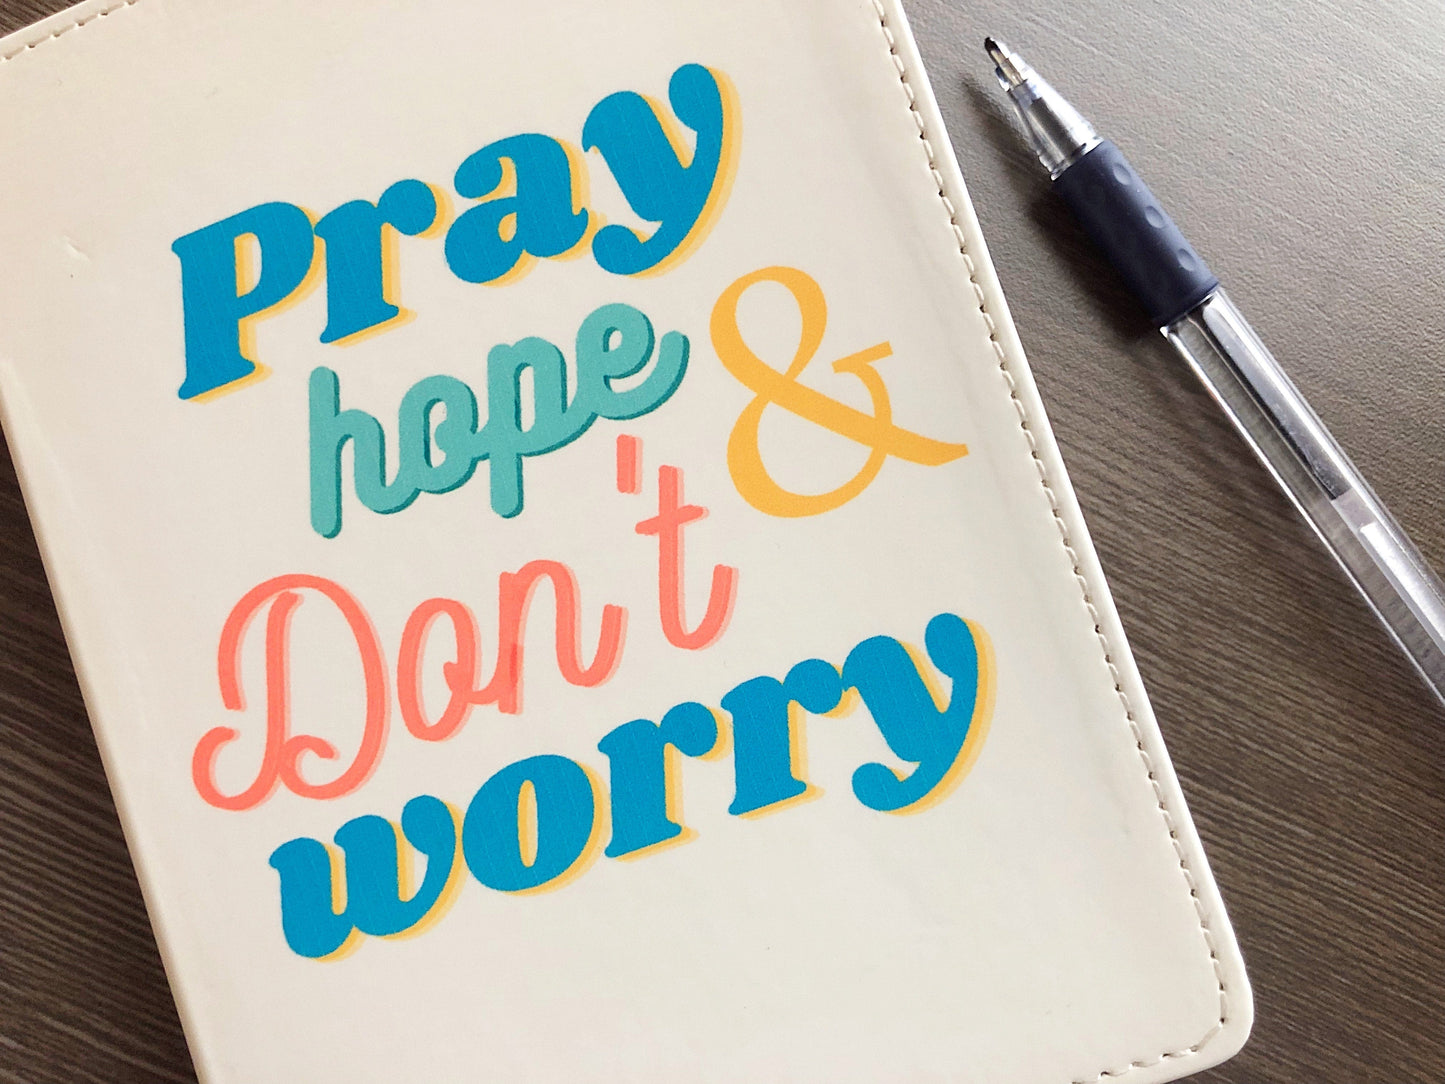 Pray Hope and Don't Worry notebook